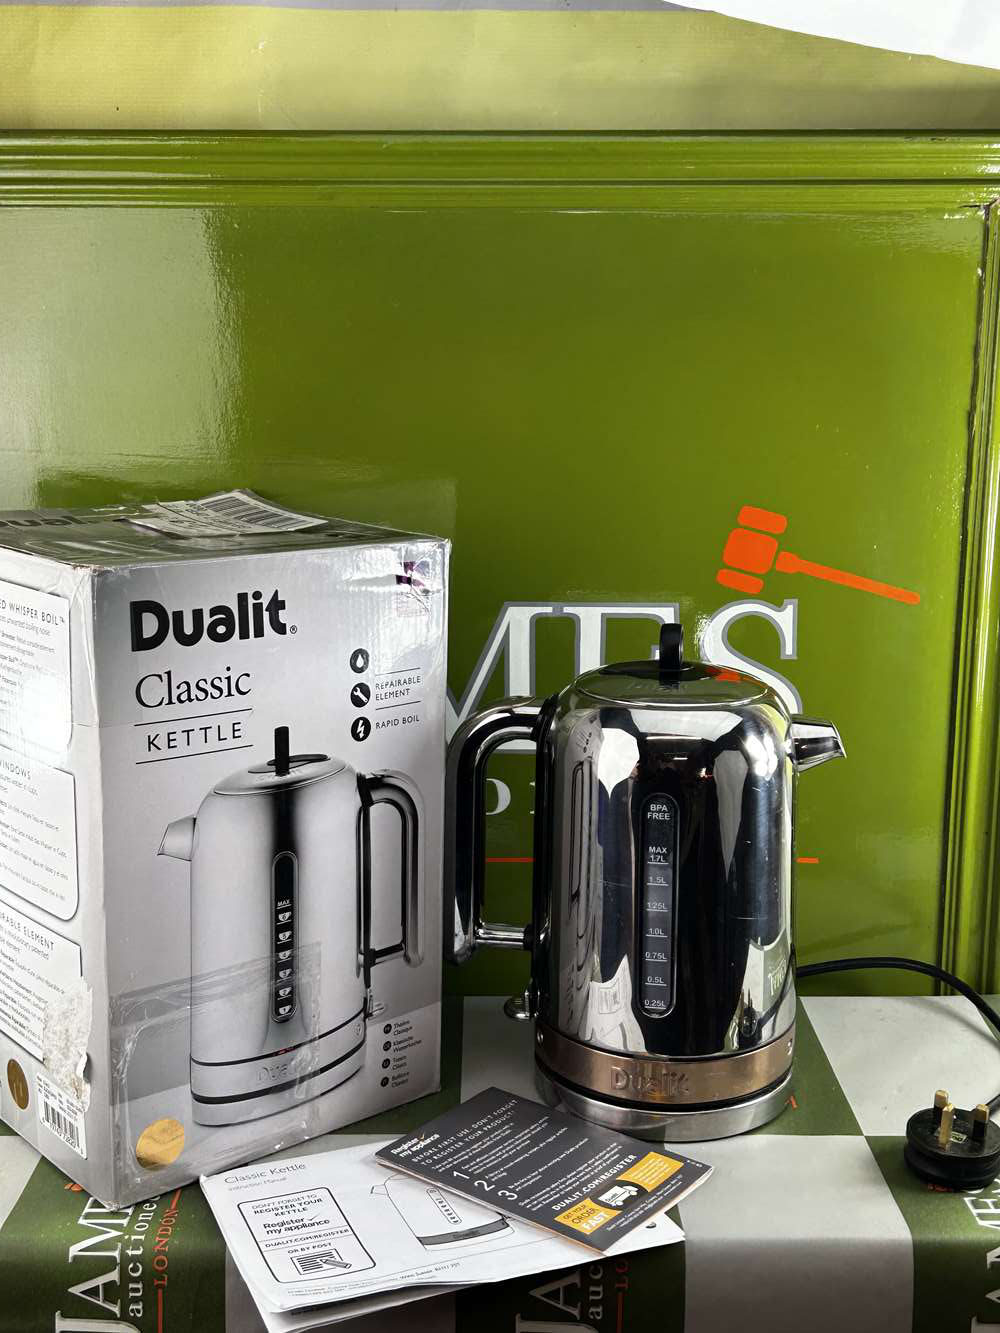 Dualit Kettle Copper & Chrome Themed Edition - Image 2 of 2